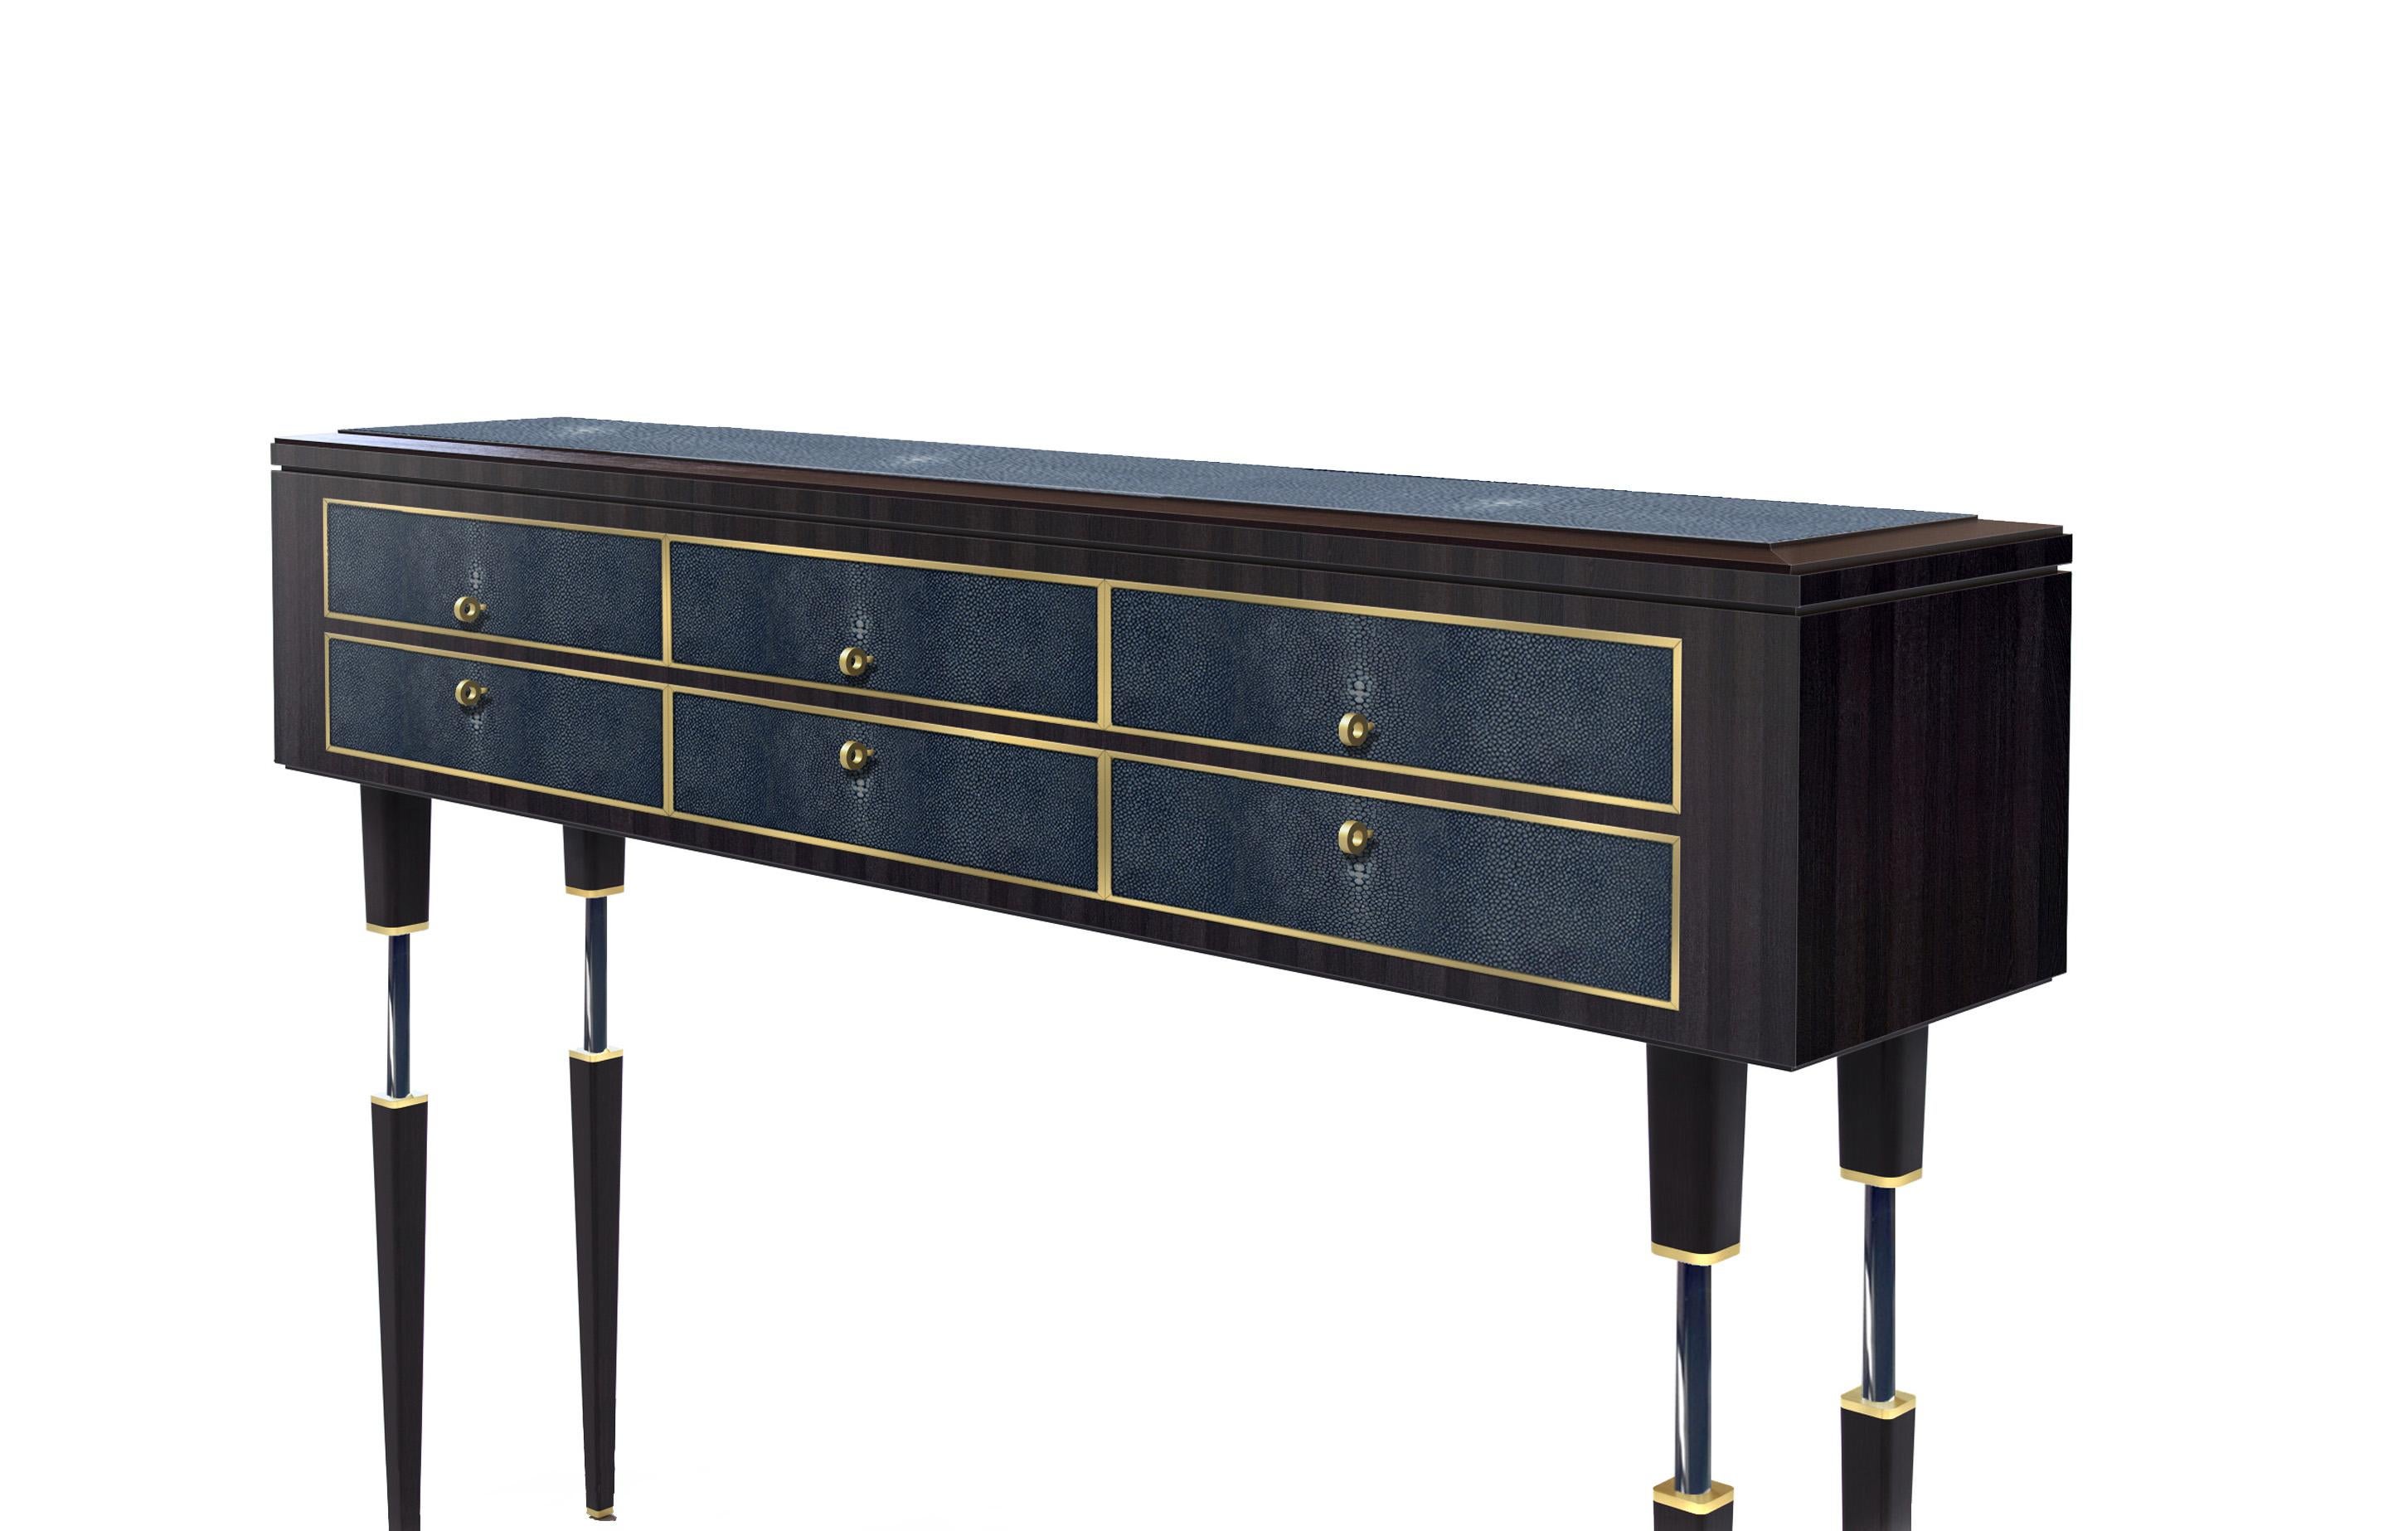 This modern console table designed in clean, simple lines and mixture of materials. The top and drawer fronts of the table are wrapped in blue Shagreen leather, highlighted with brushed brass details. The satin finish of rich and dark chocolate